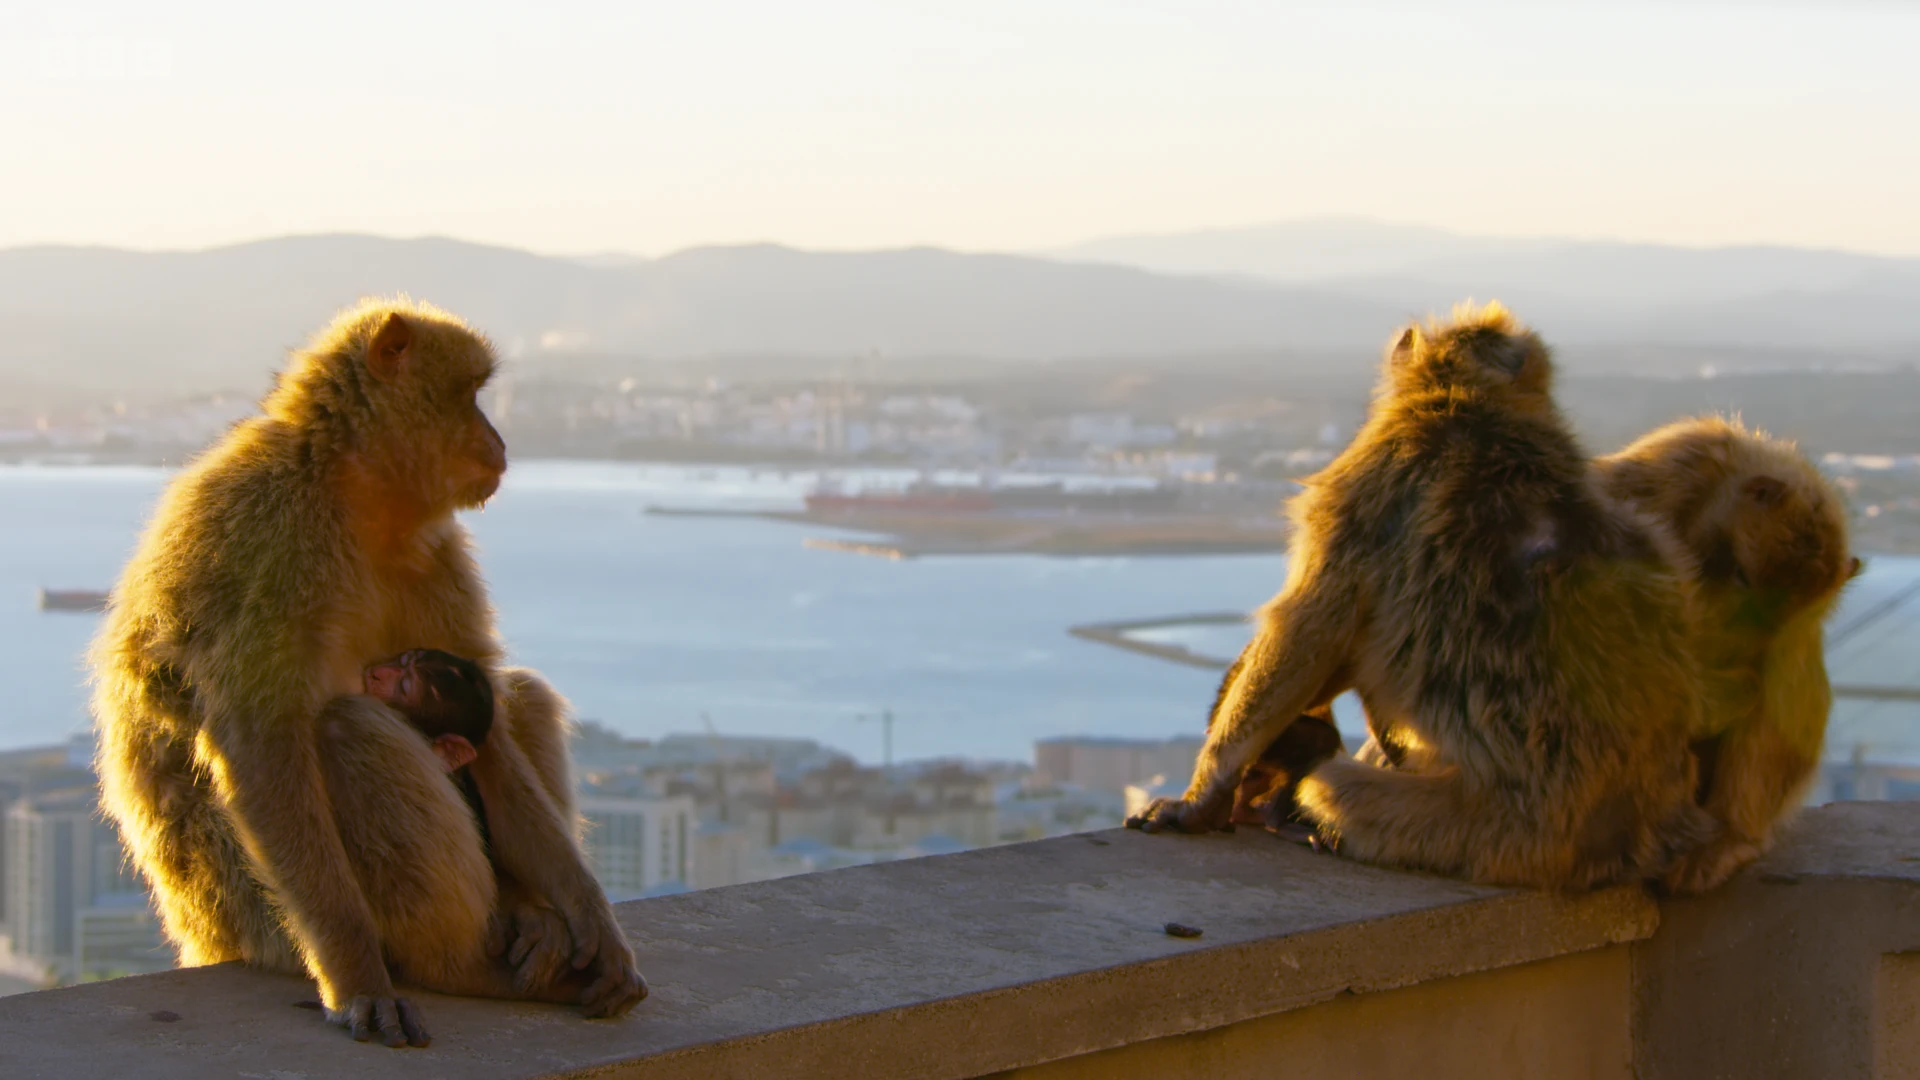 Barbary macaque (Macaca sylvanus) as shown in Seven Worlds, One Planet - Europe